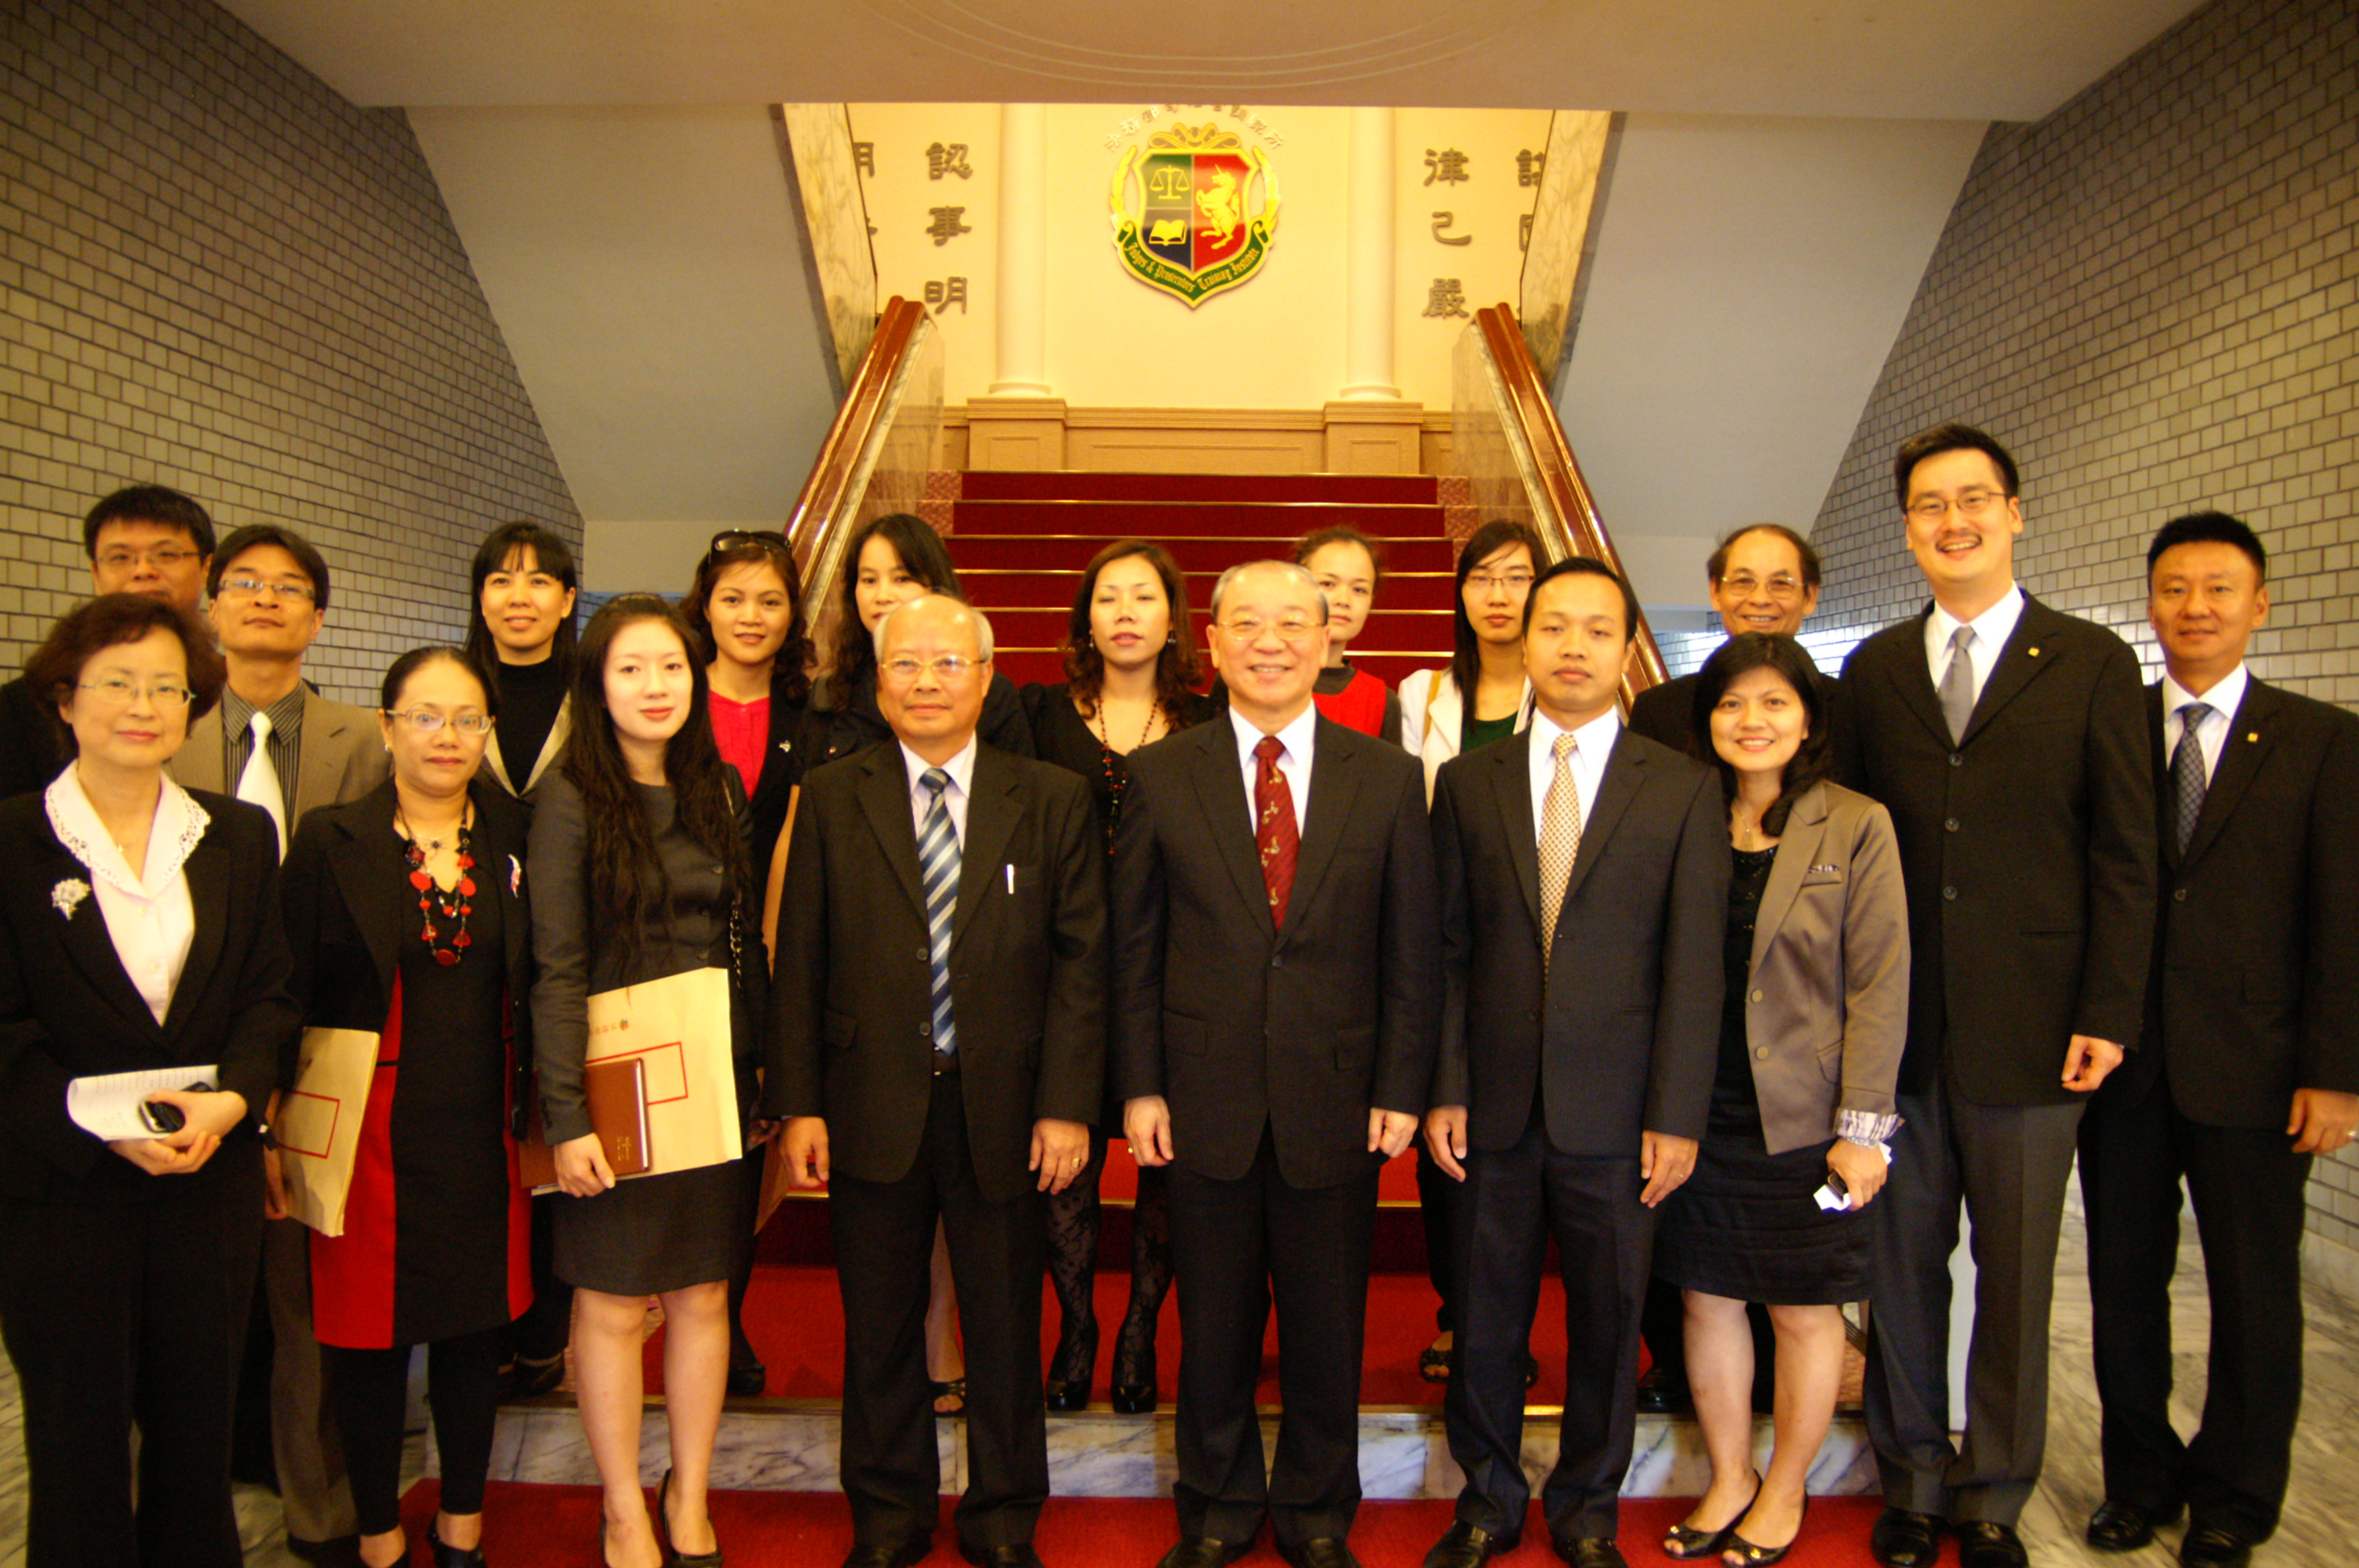 On December 7, 2011, delegation of Ministry of Justice, Vietnam along with Lawrence S. Ting Memorial Fund visited JPTI.